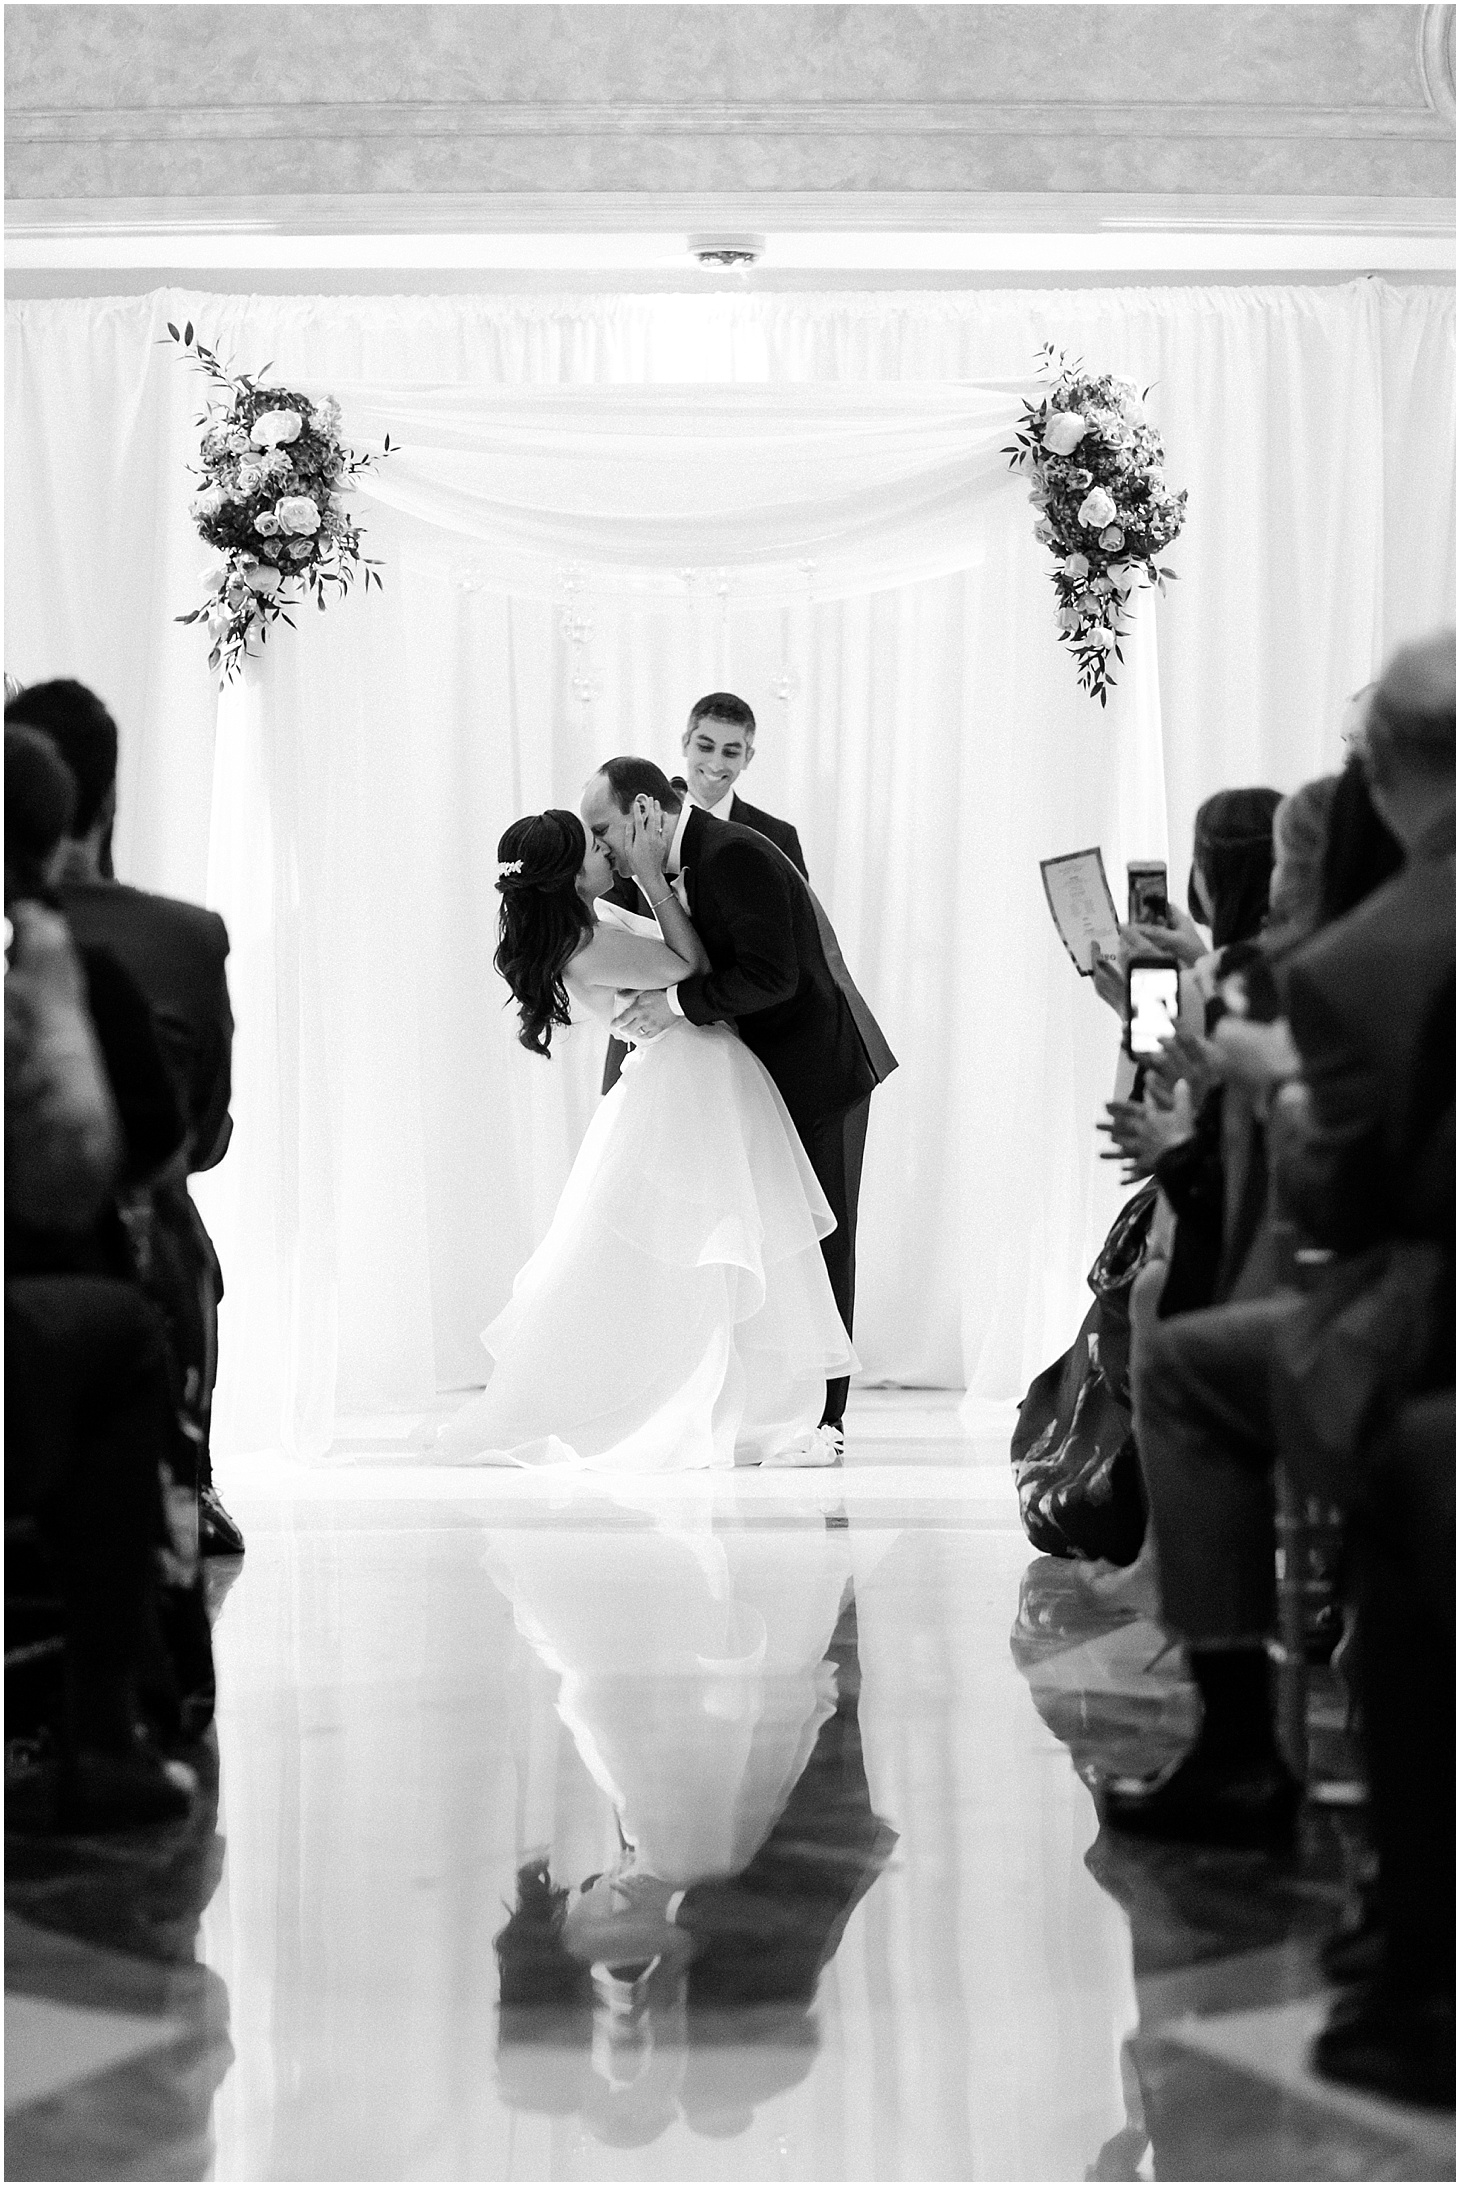 Wedding Ceremony at National Museum of Women in the Arts, Museum-Inspired Spring Wedding in Washington DC, Sarah Bradshaw Photography, DC Wedding Photographer